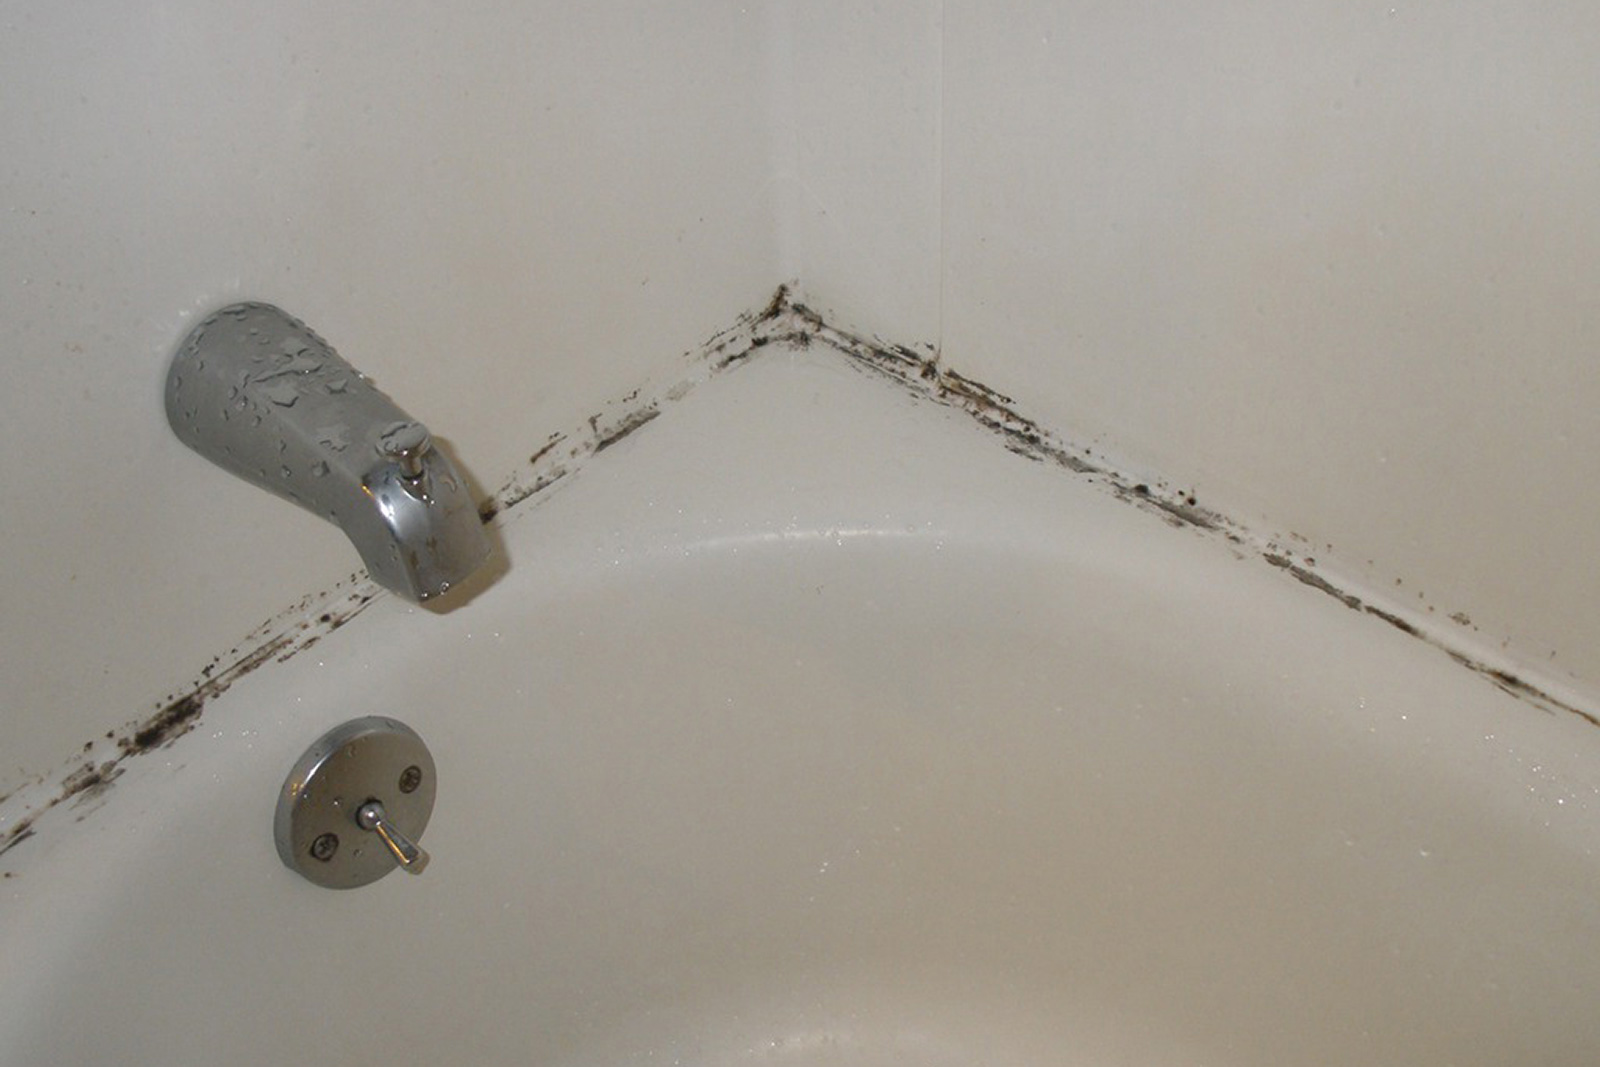 Bathroom Mold On Ceiling - How To Remove Mold From A Bathroom Ceiling